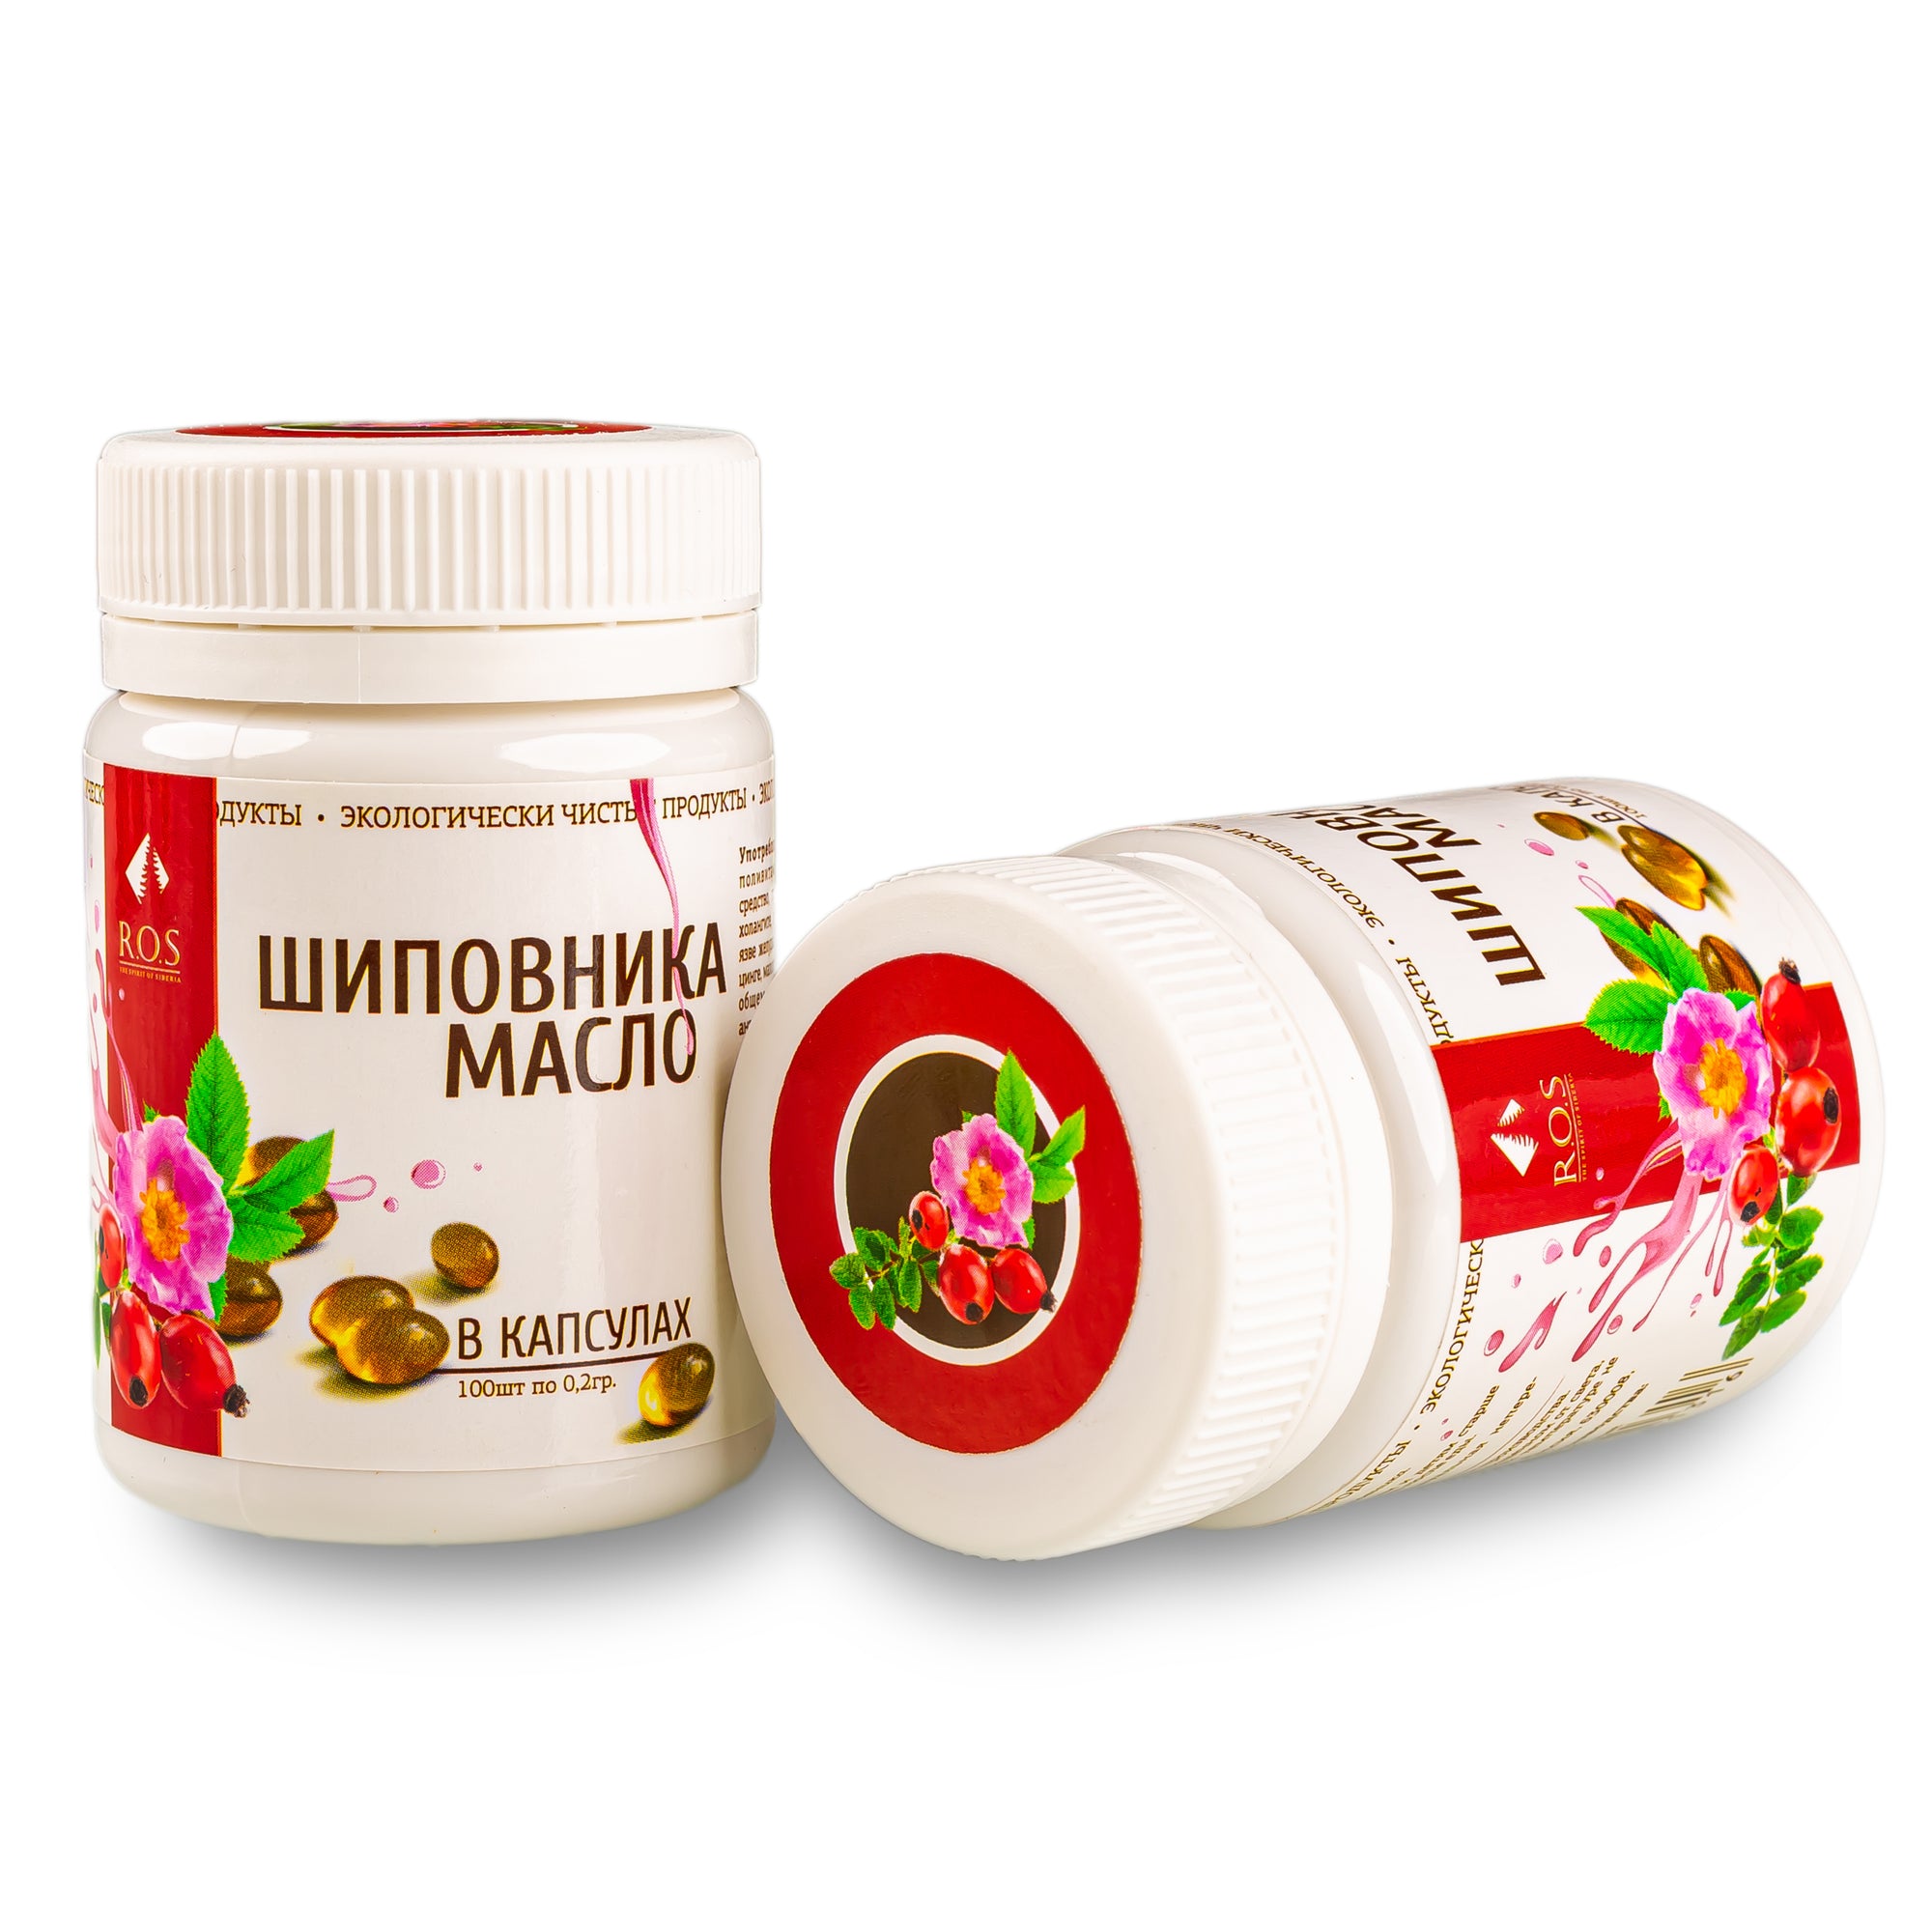 How to use rosehip oil in capsules?